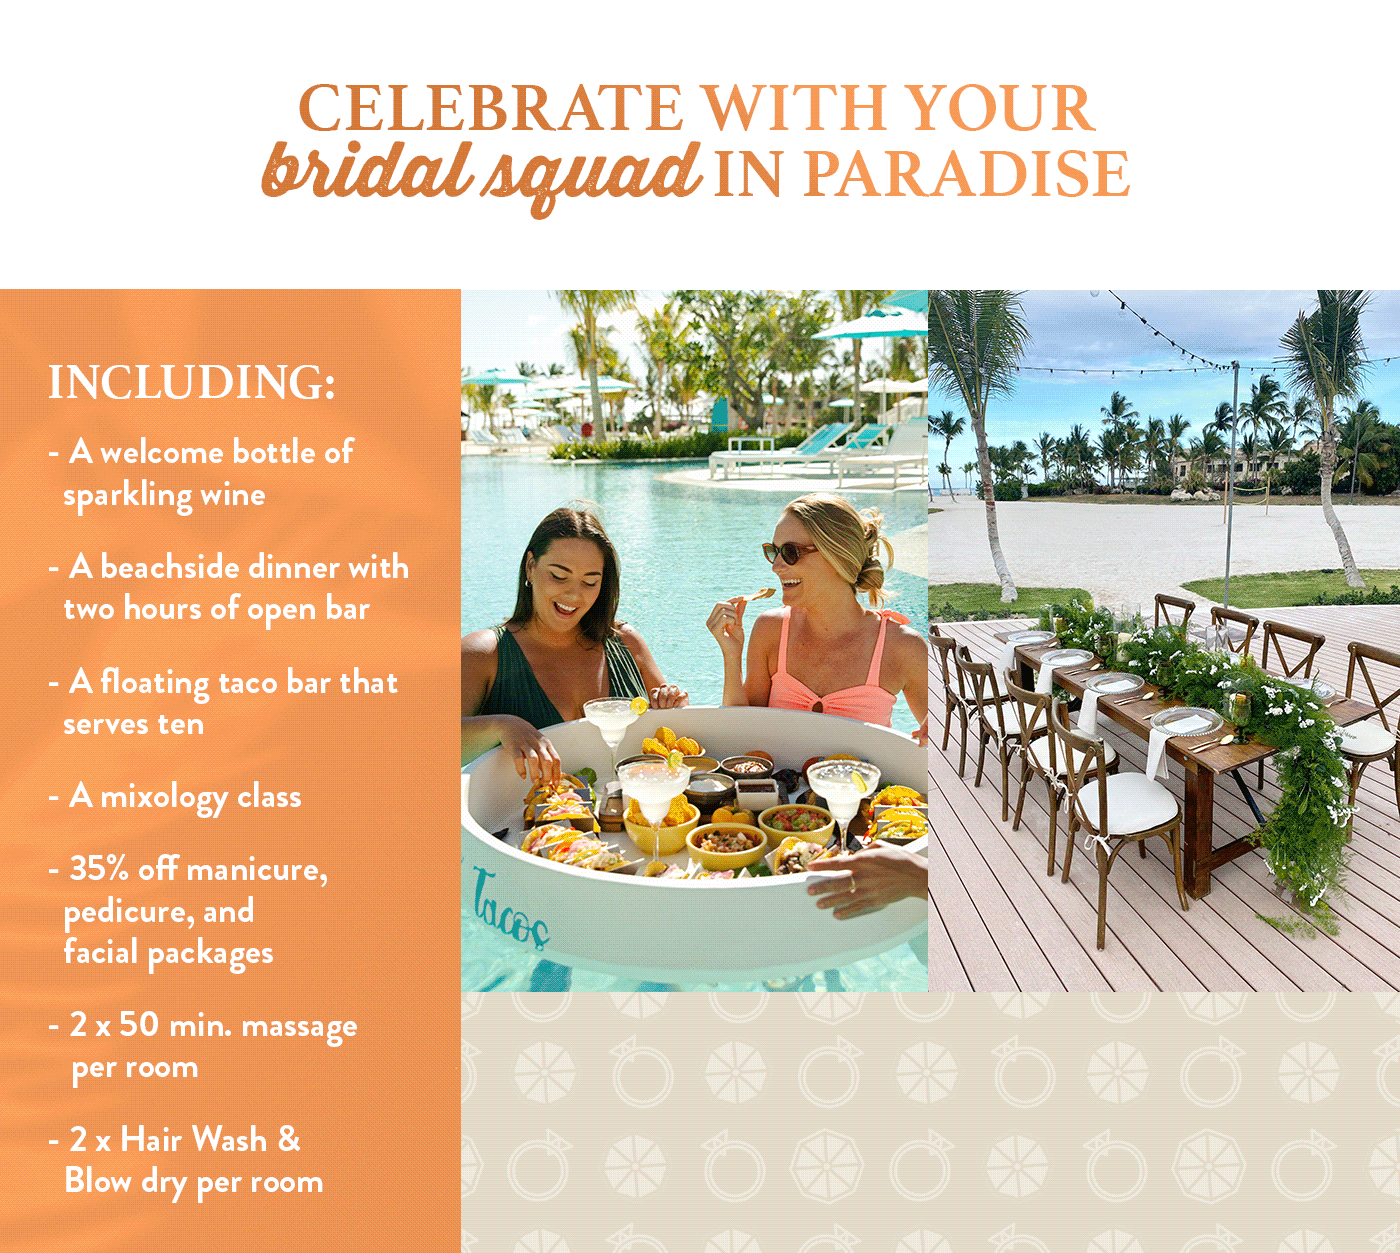 Celebrate with your bridal squad in paradise